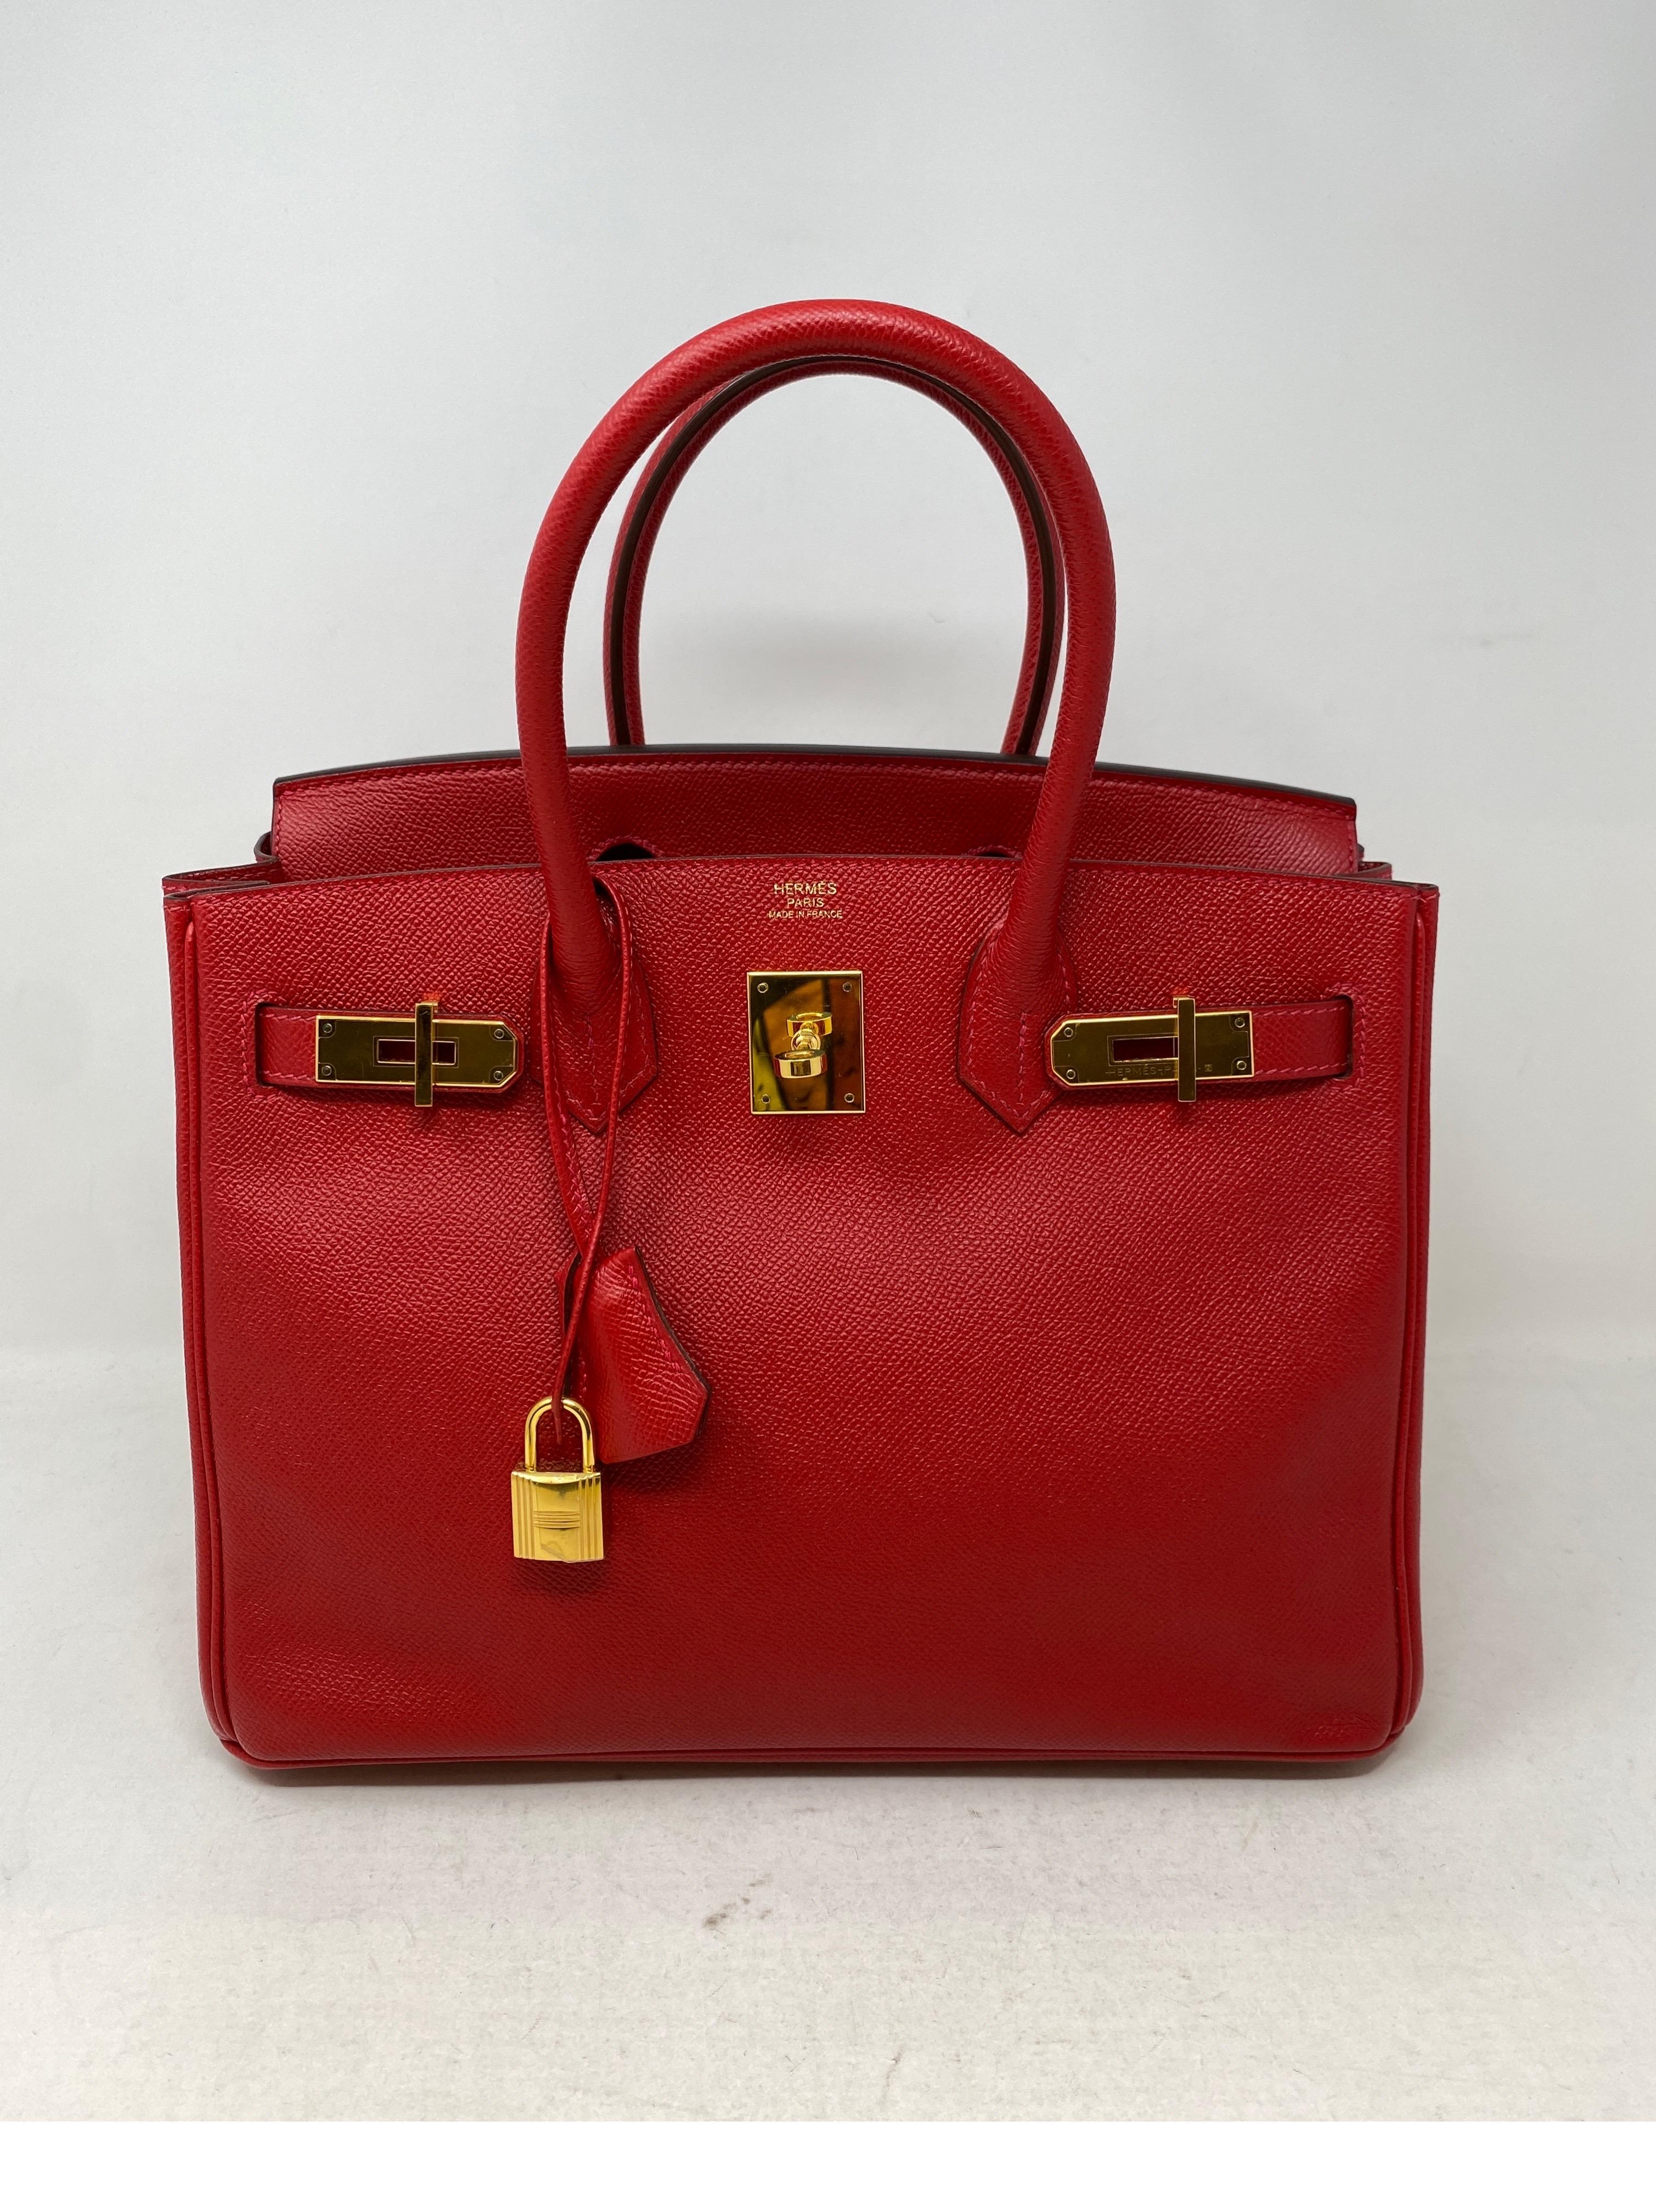 Hermes Birkin 30 Red Bag. Stunning Rouge Casaque Birkin. Gold hardware. Epsom leather. Looks brand new. Still has palstic on hardware. Excellent condition. Would make a great addition to your collection. Desired size and color. Includes clochette,